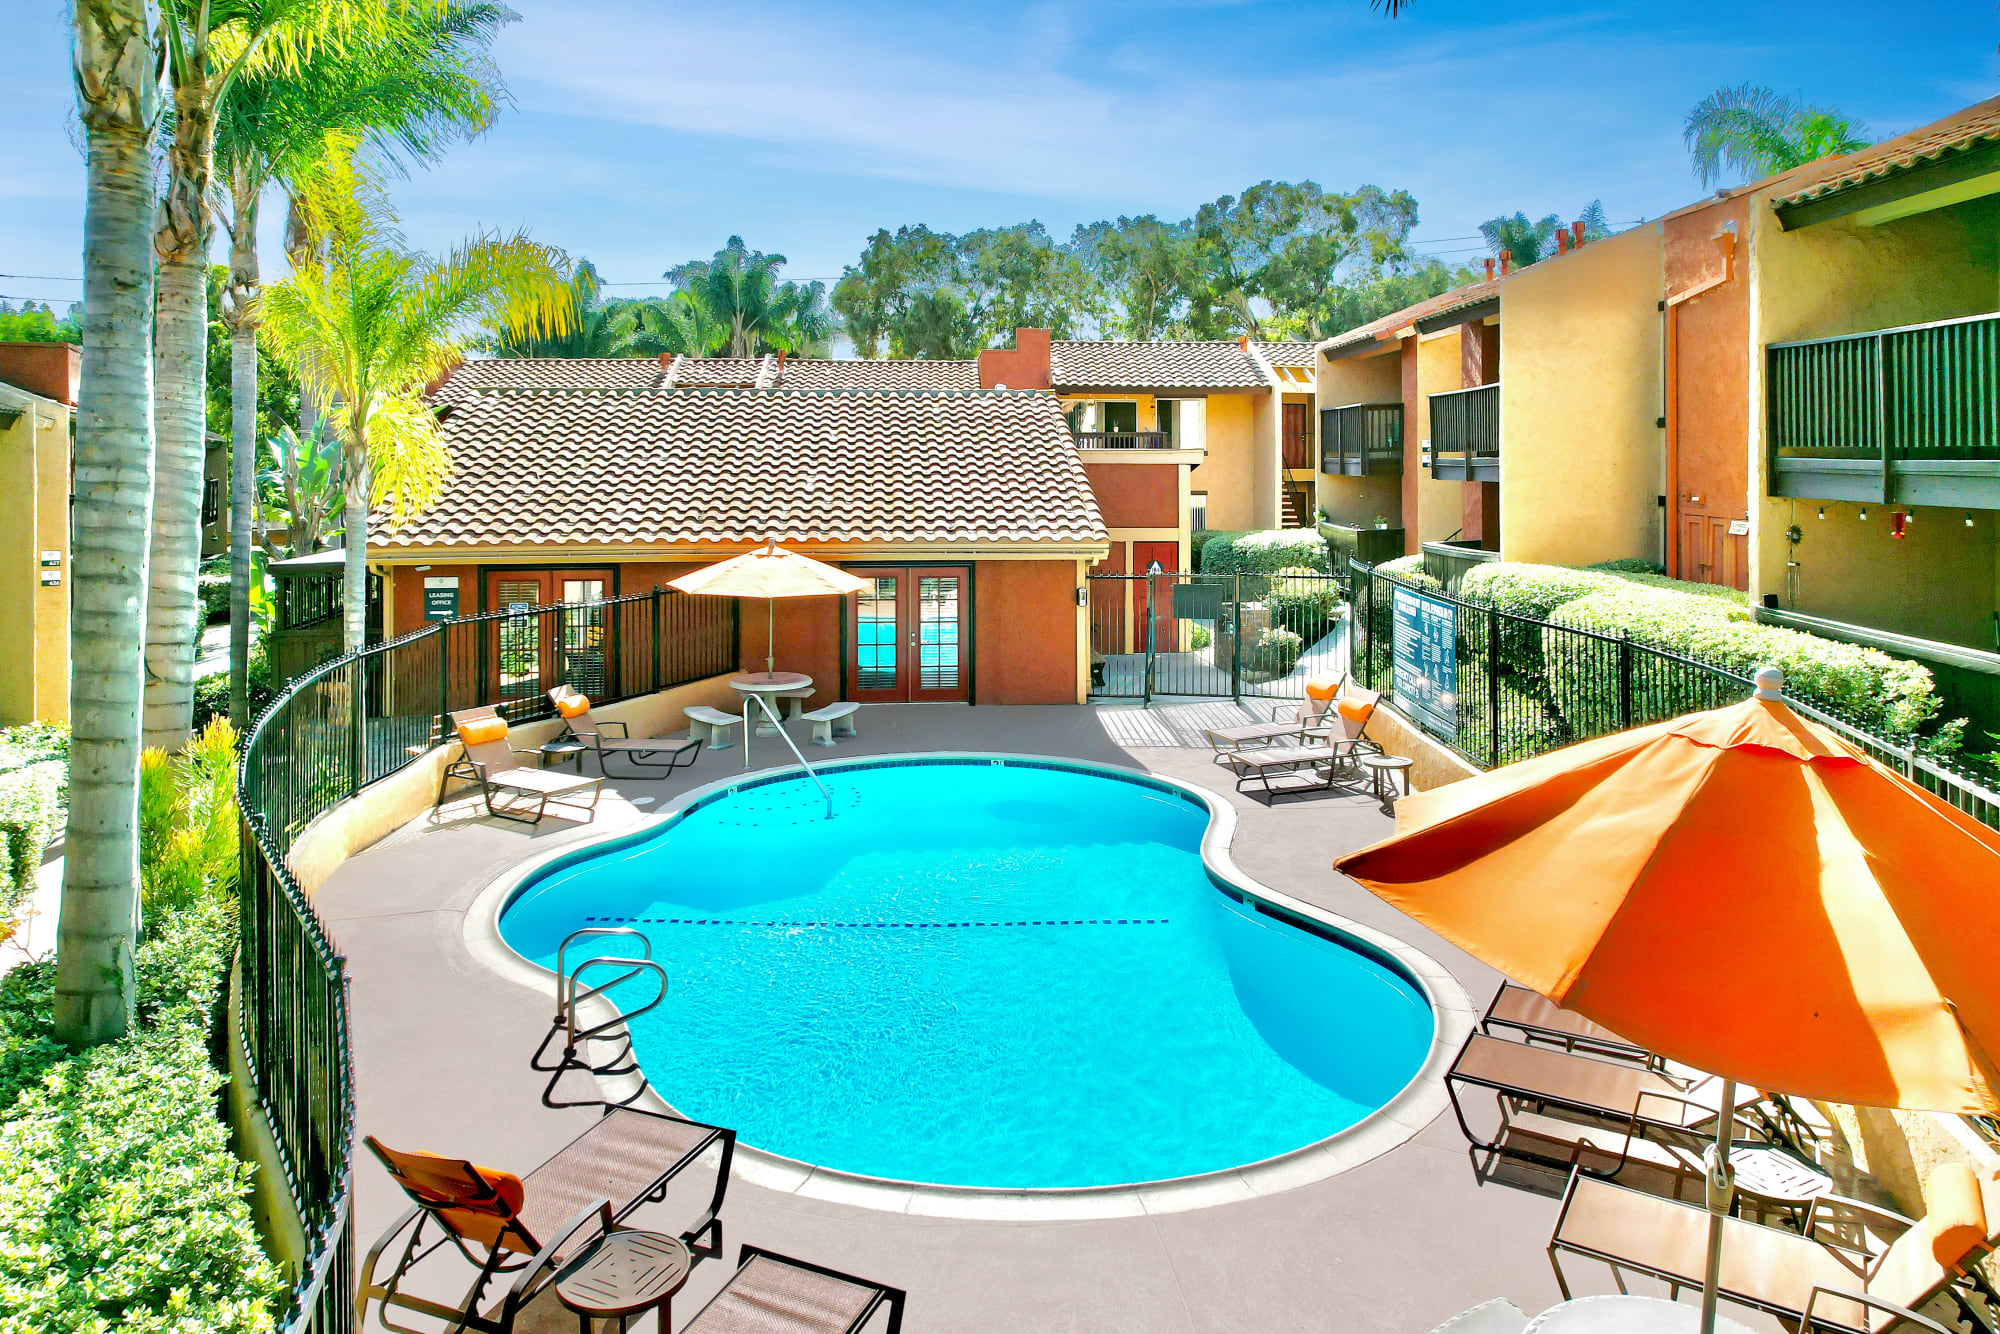 Pool with lounge chairs at Shadow Ridge Apartments in Oceanside, California